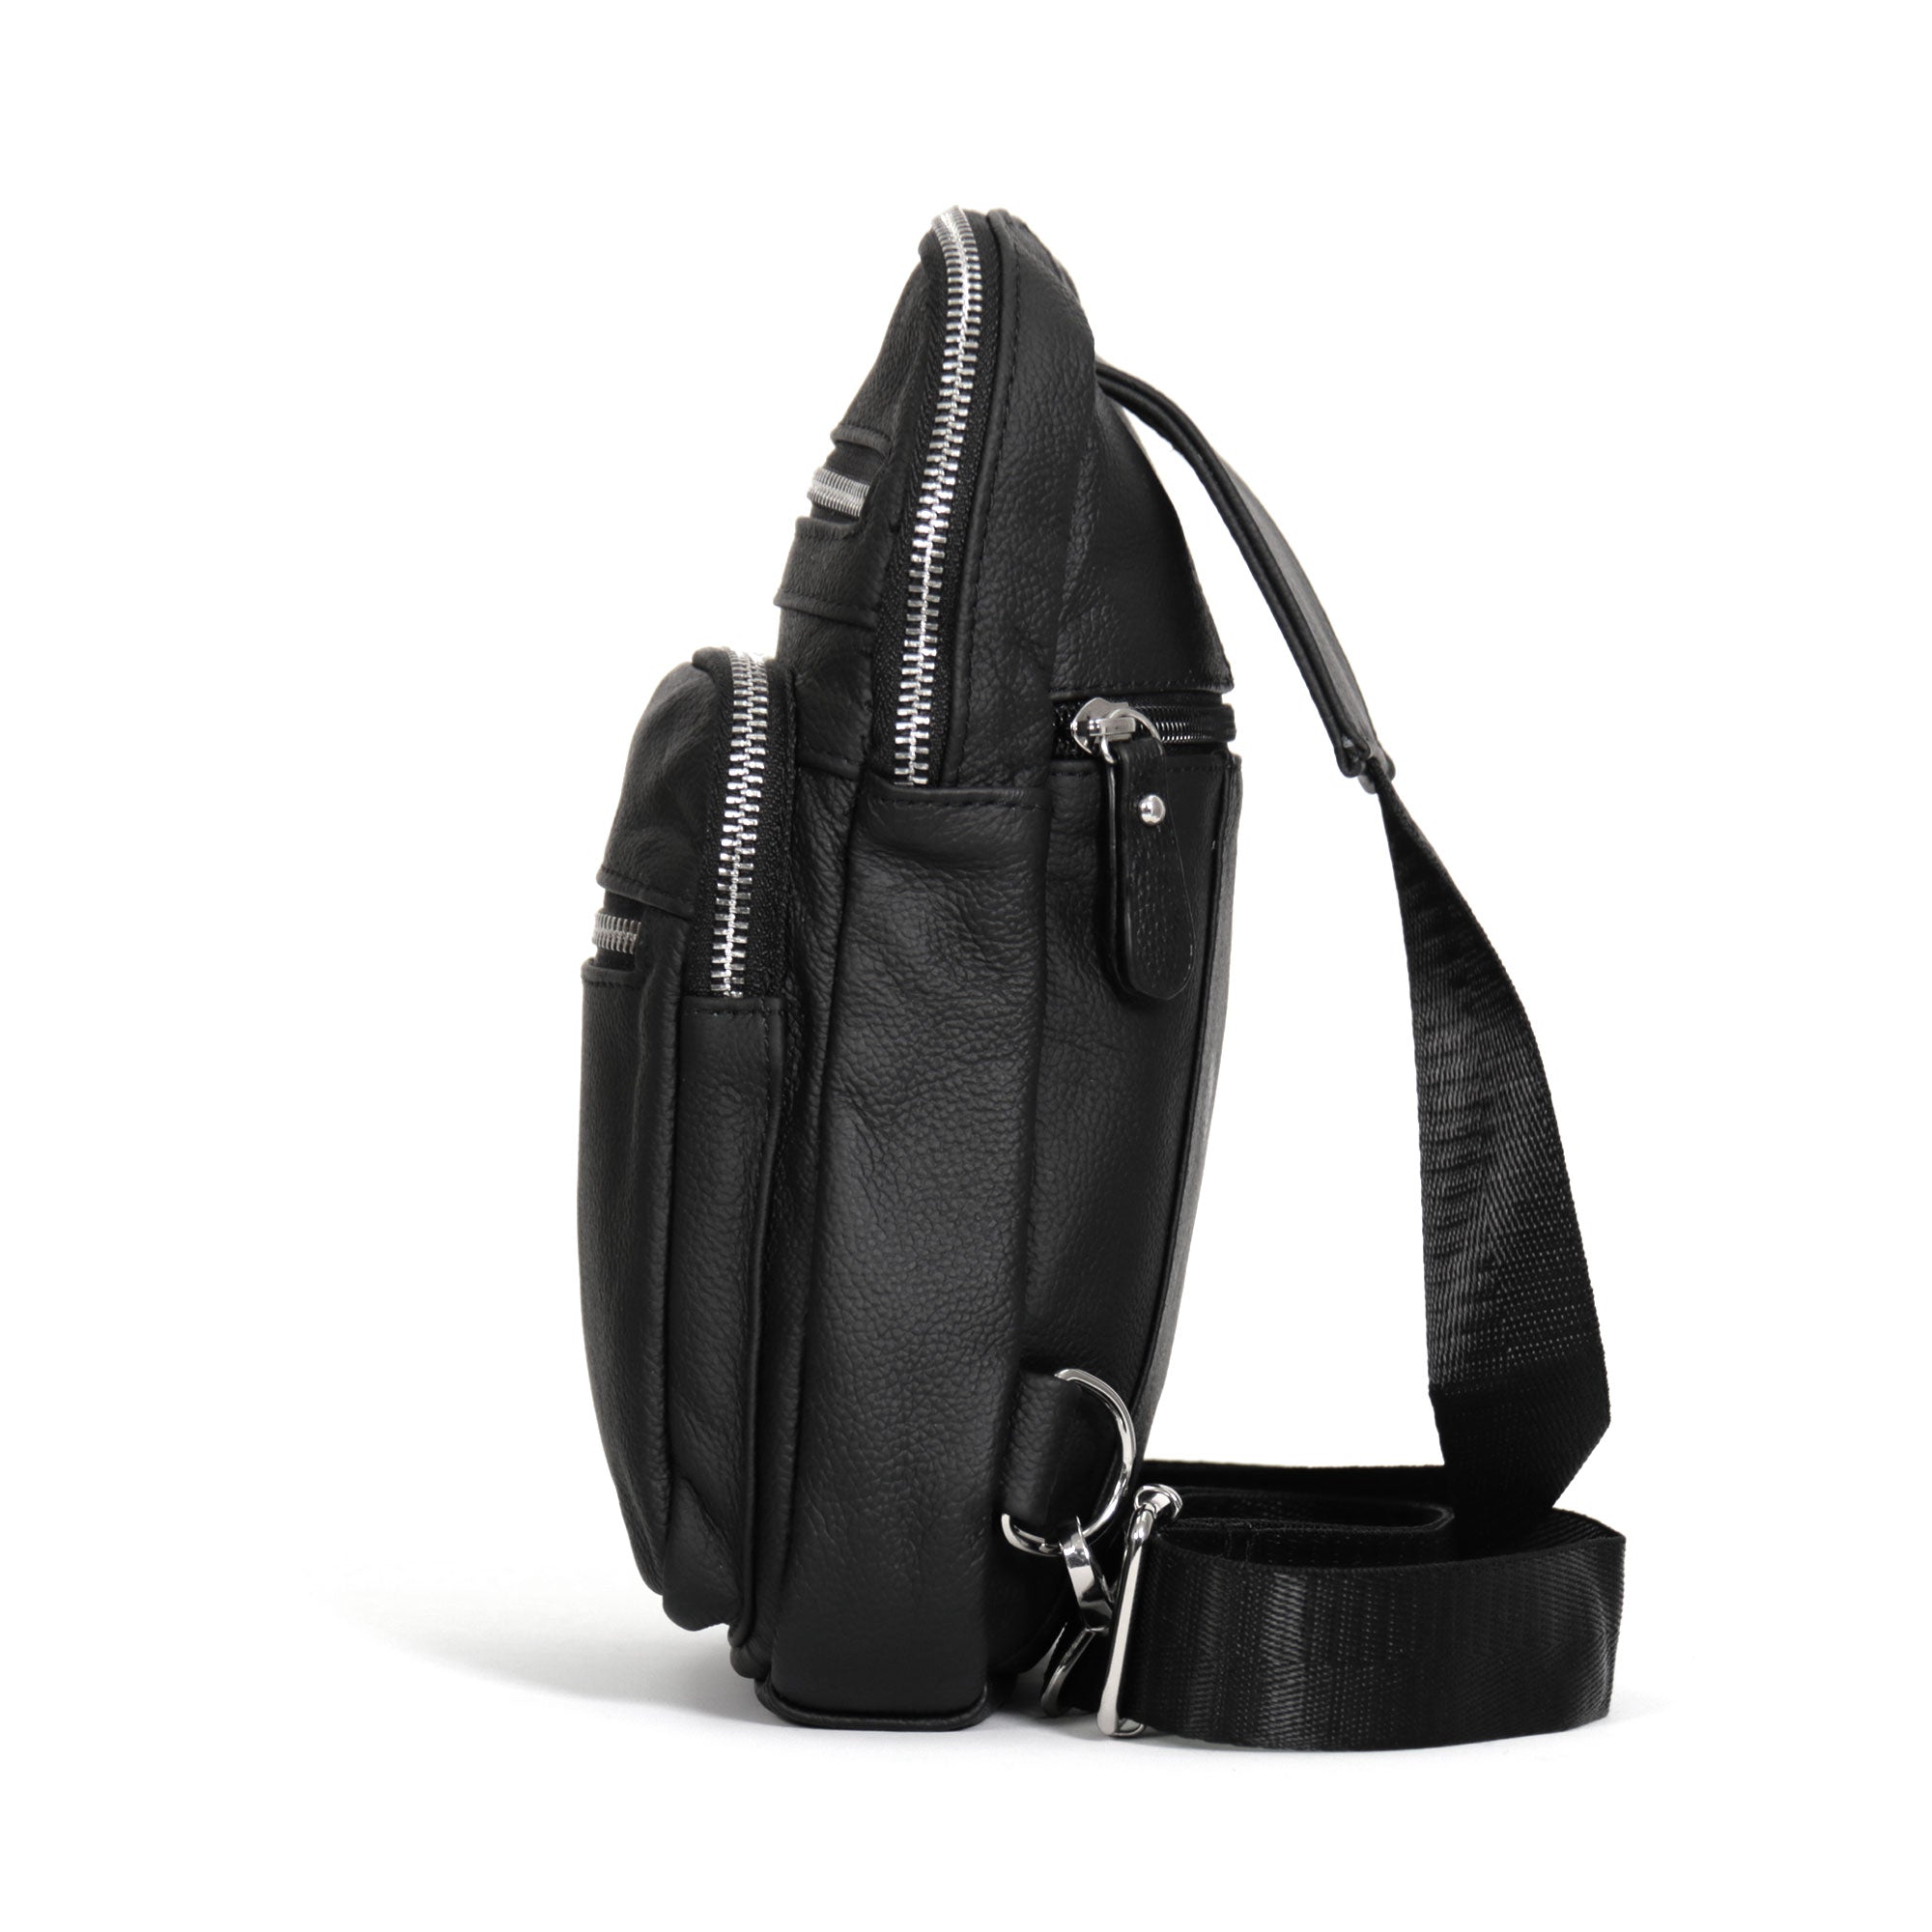 Hot Leathers Compact Zipper Backpack